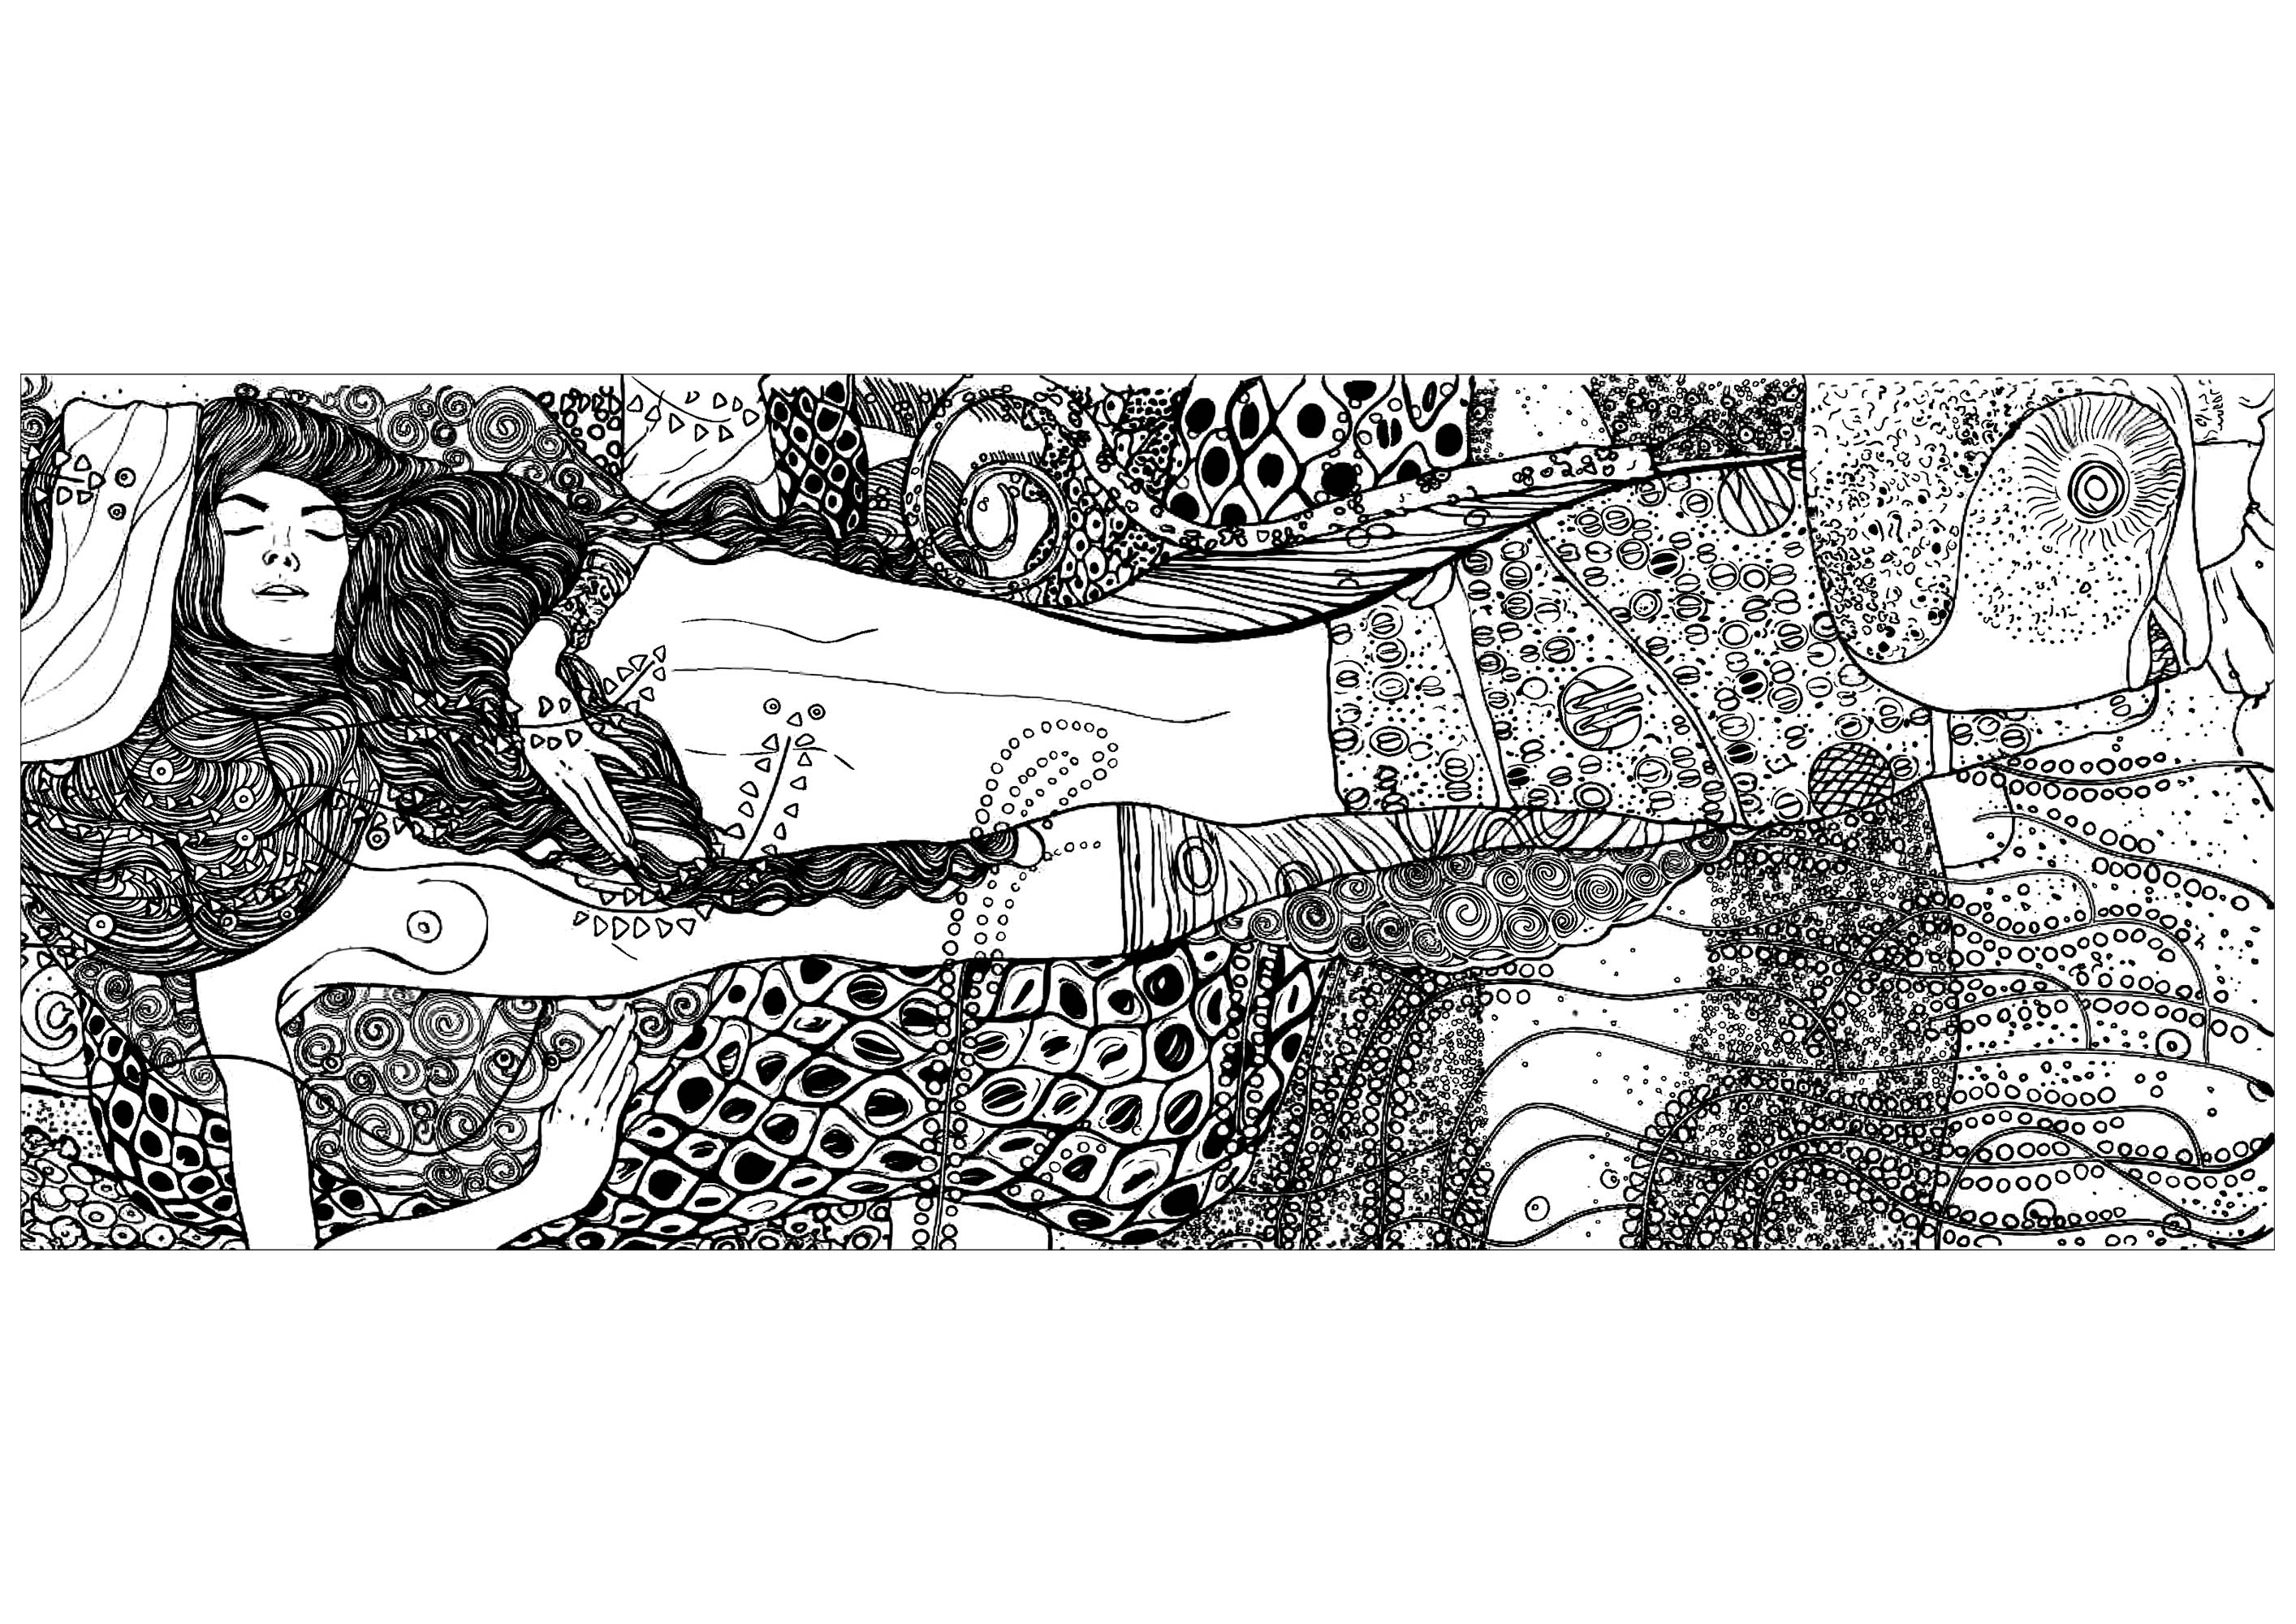 Coloring page created from the painting 'Water serpents I' by Gustav Klimt